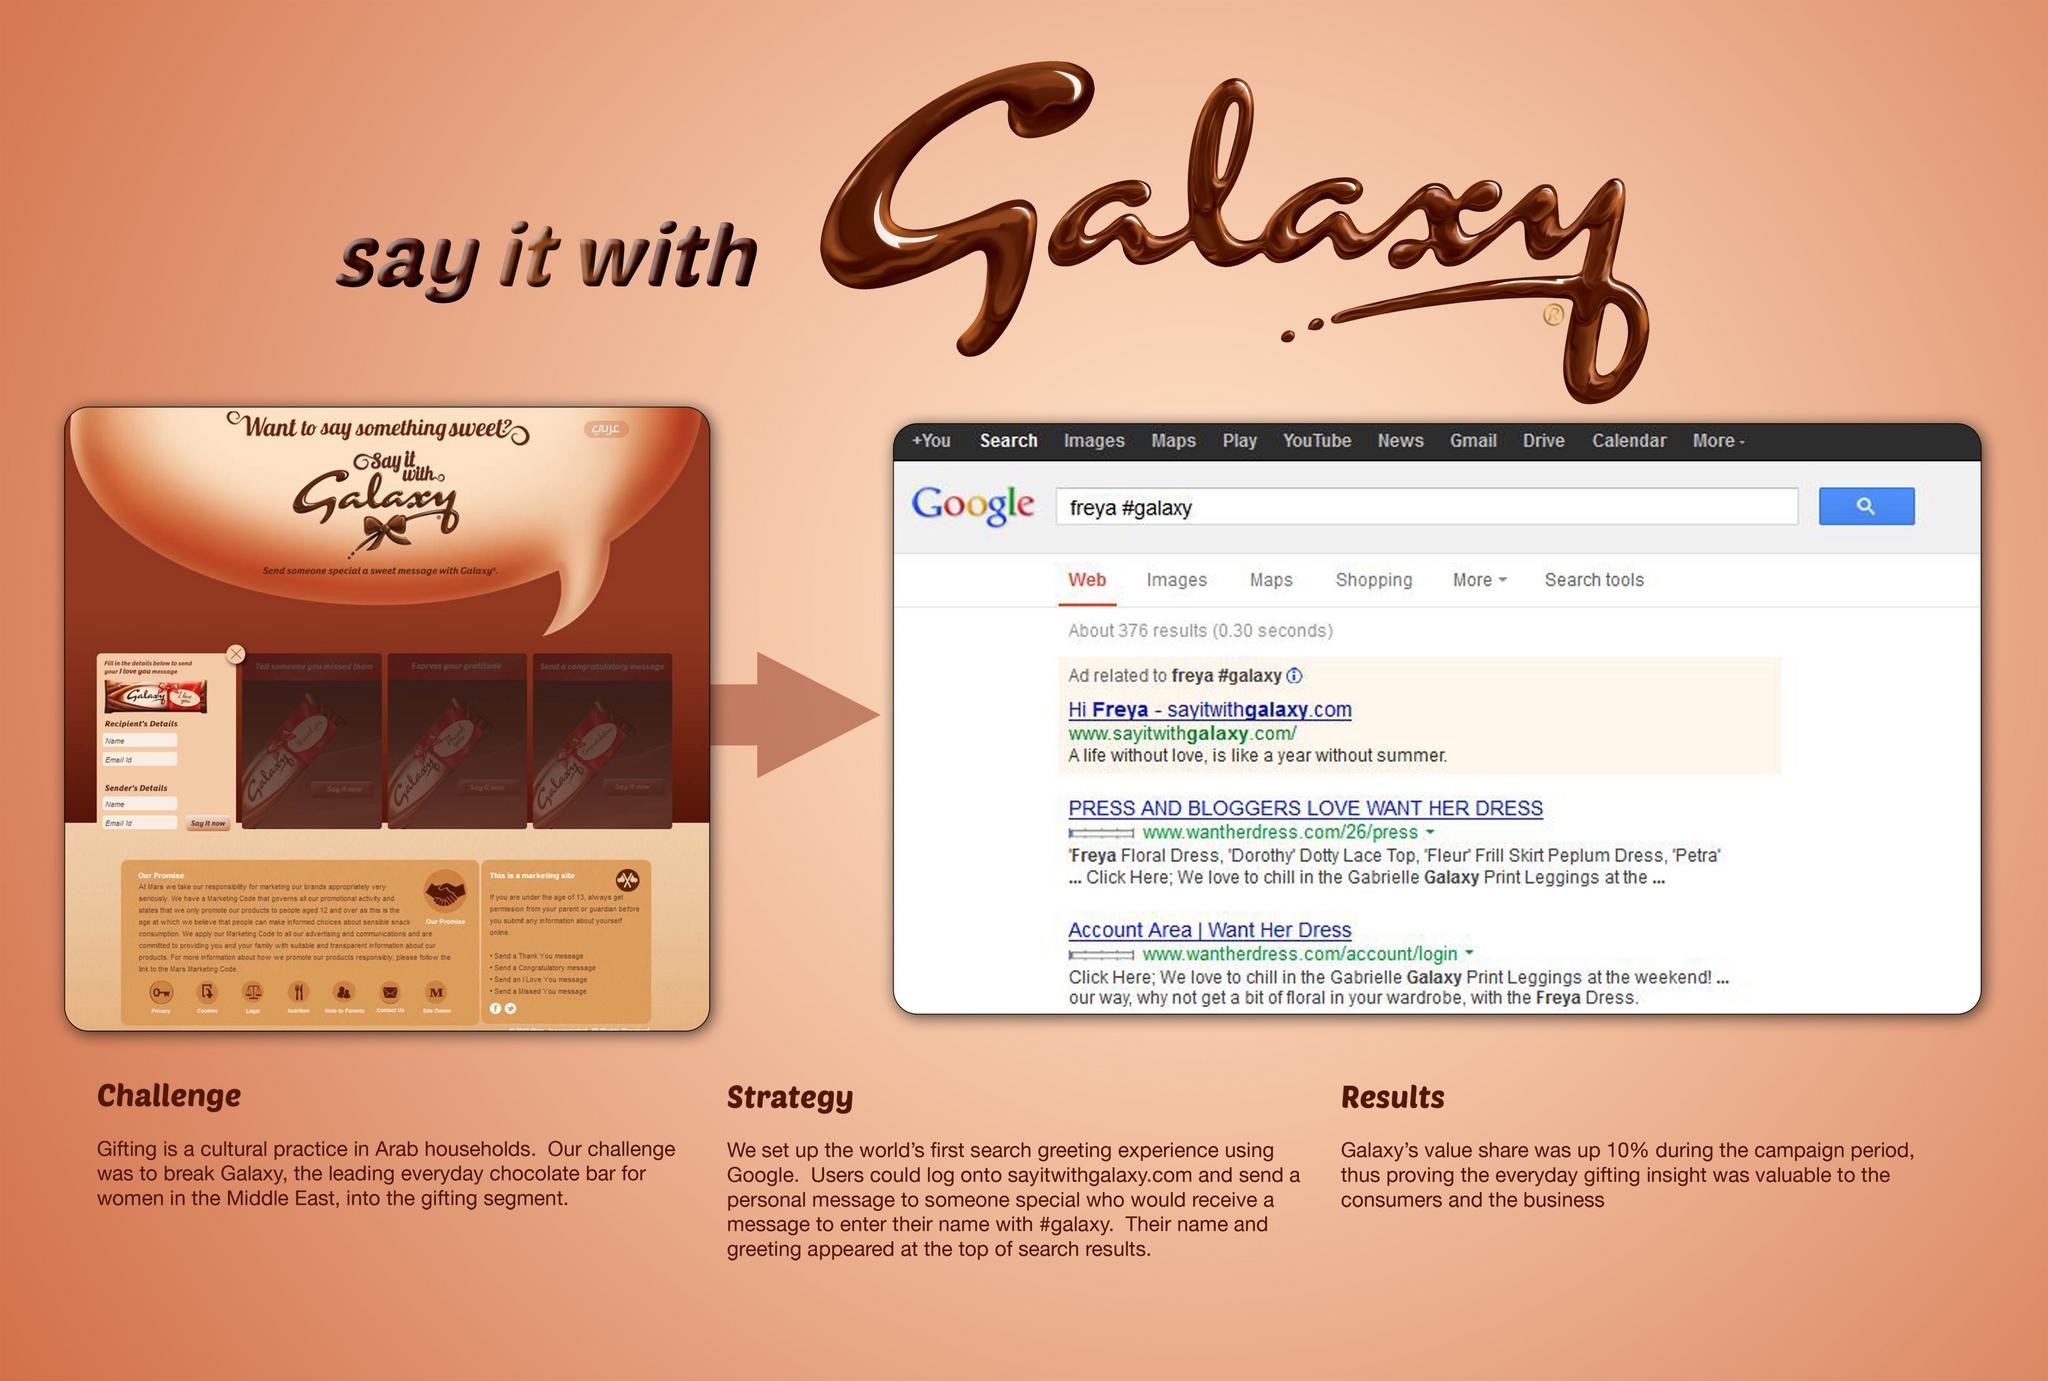 SAY IT WITH GALAXY